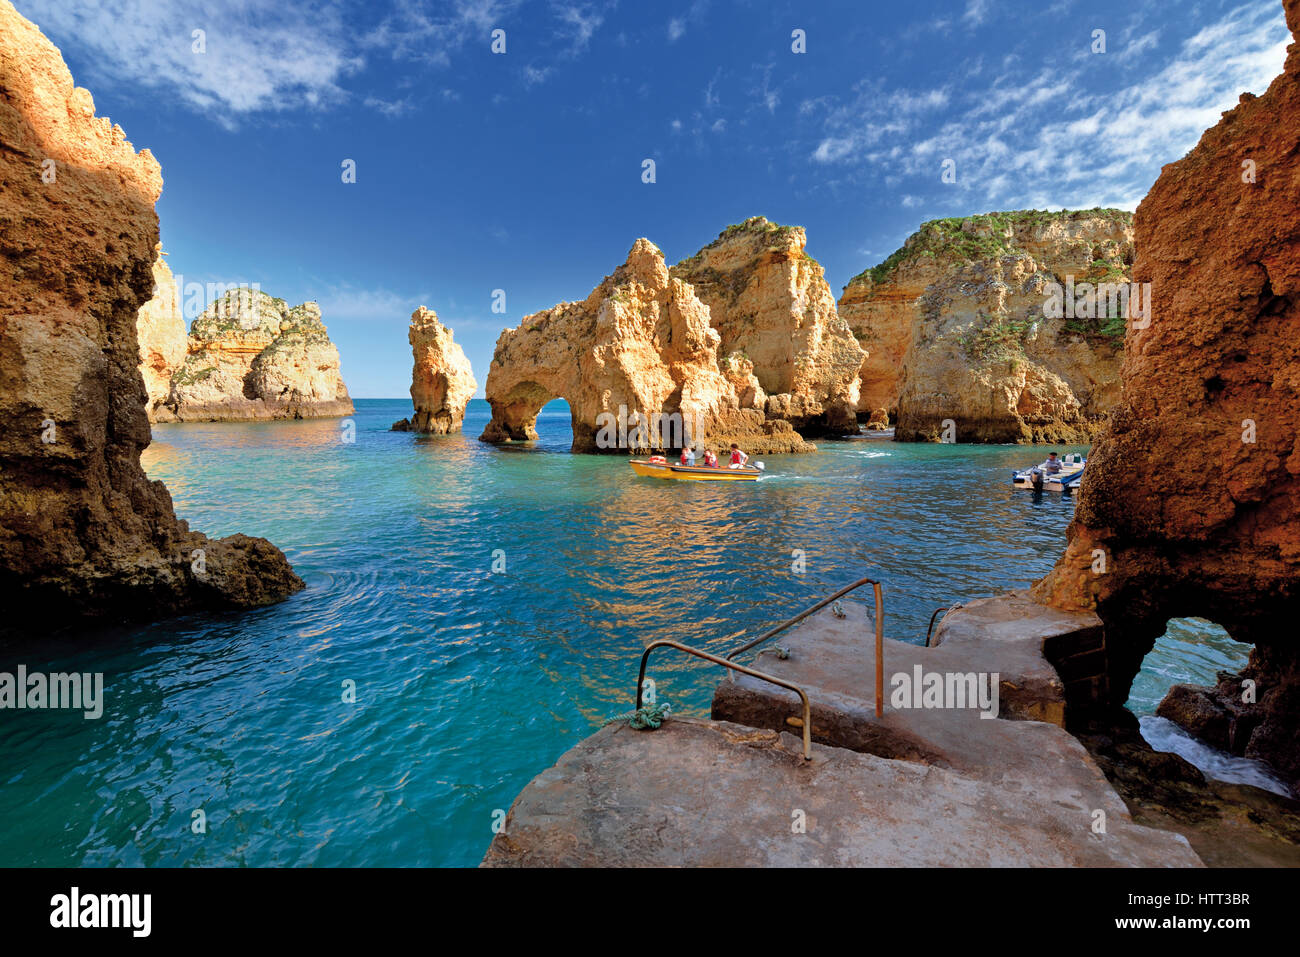 Algarve: Boat trips along the rock formations and turquoise waters of Ponta da Piedade Stock Photo